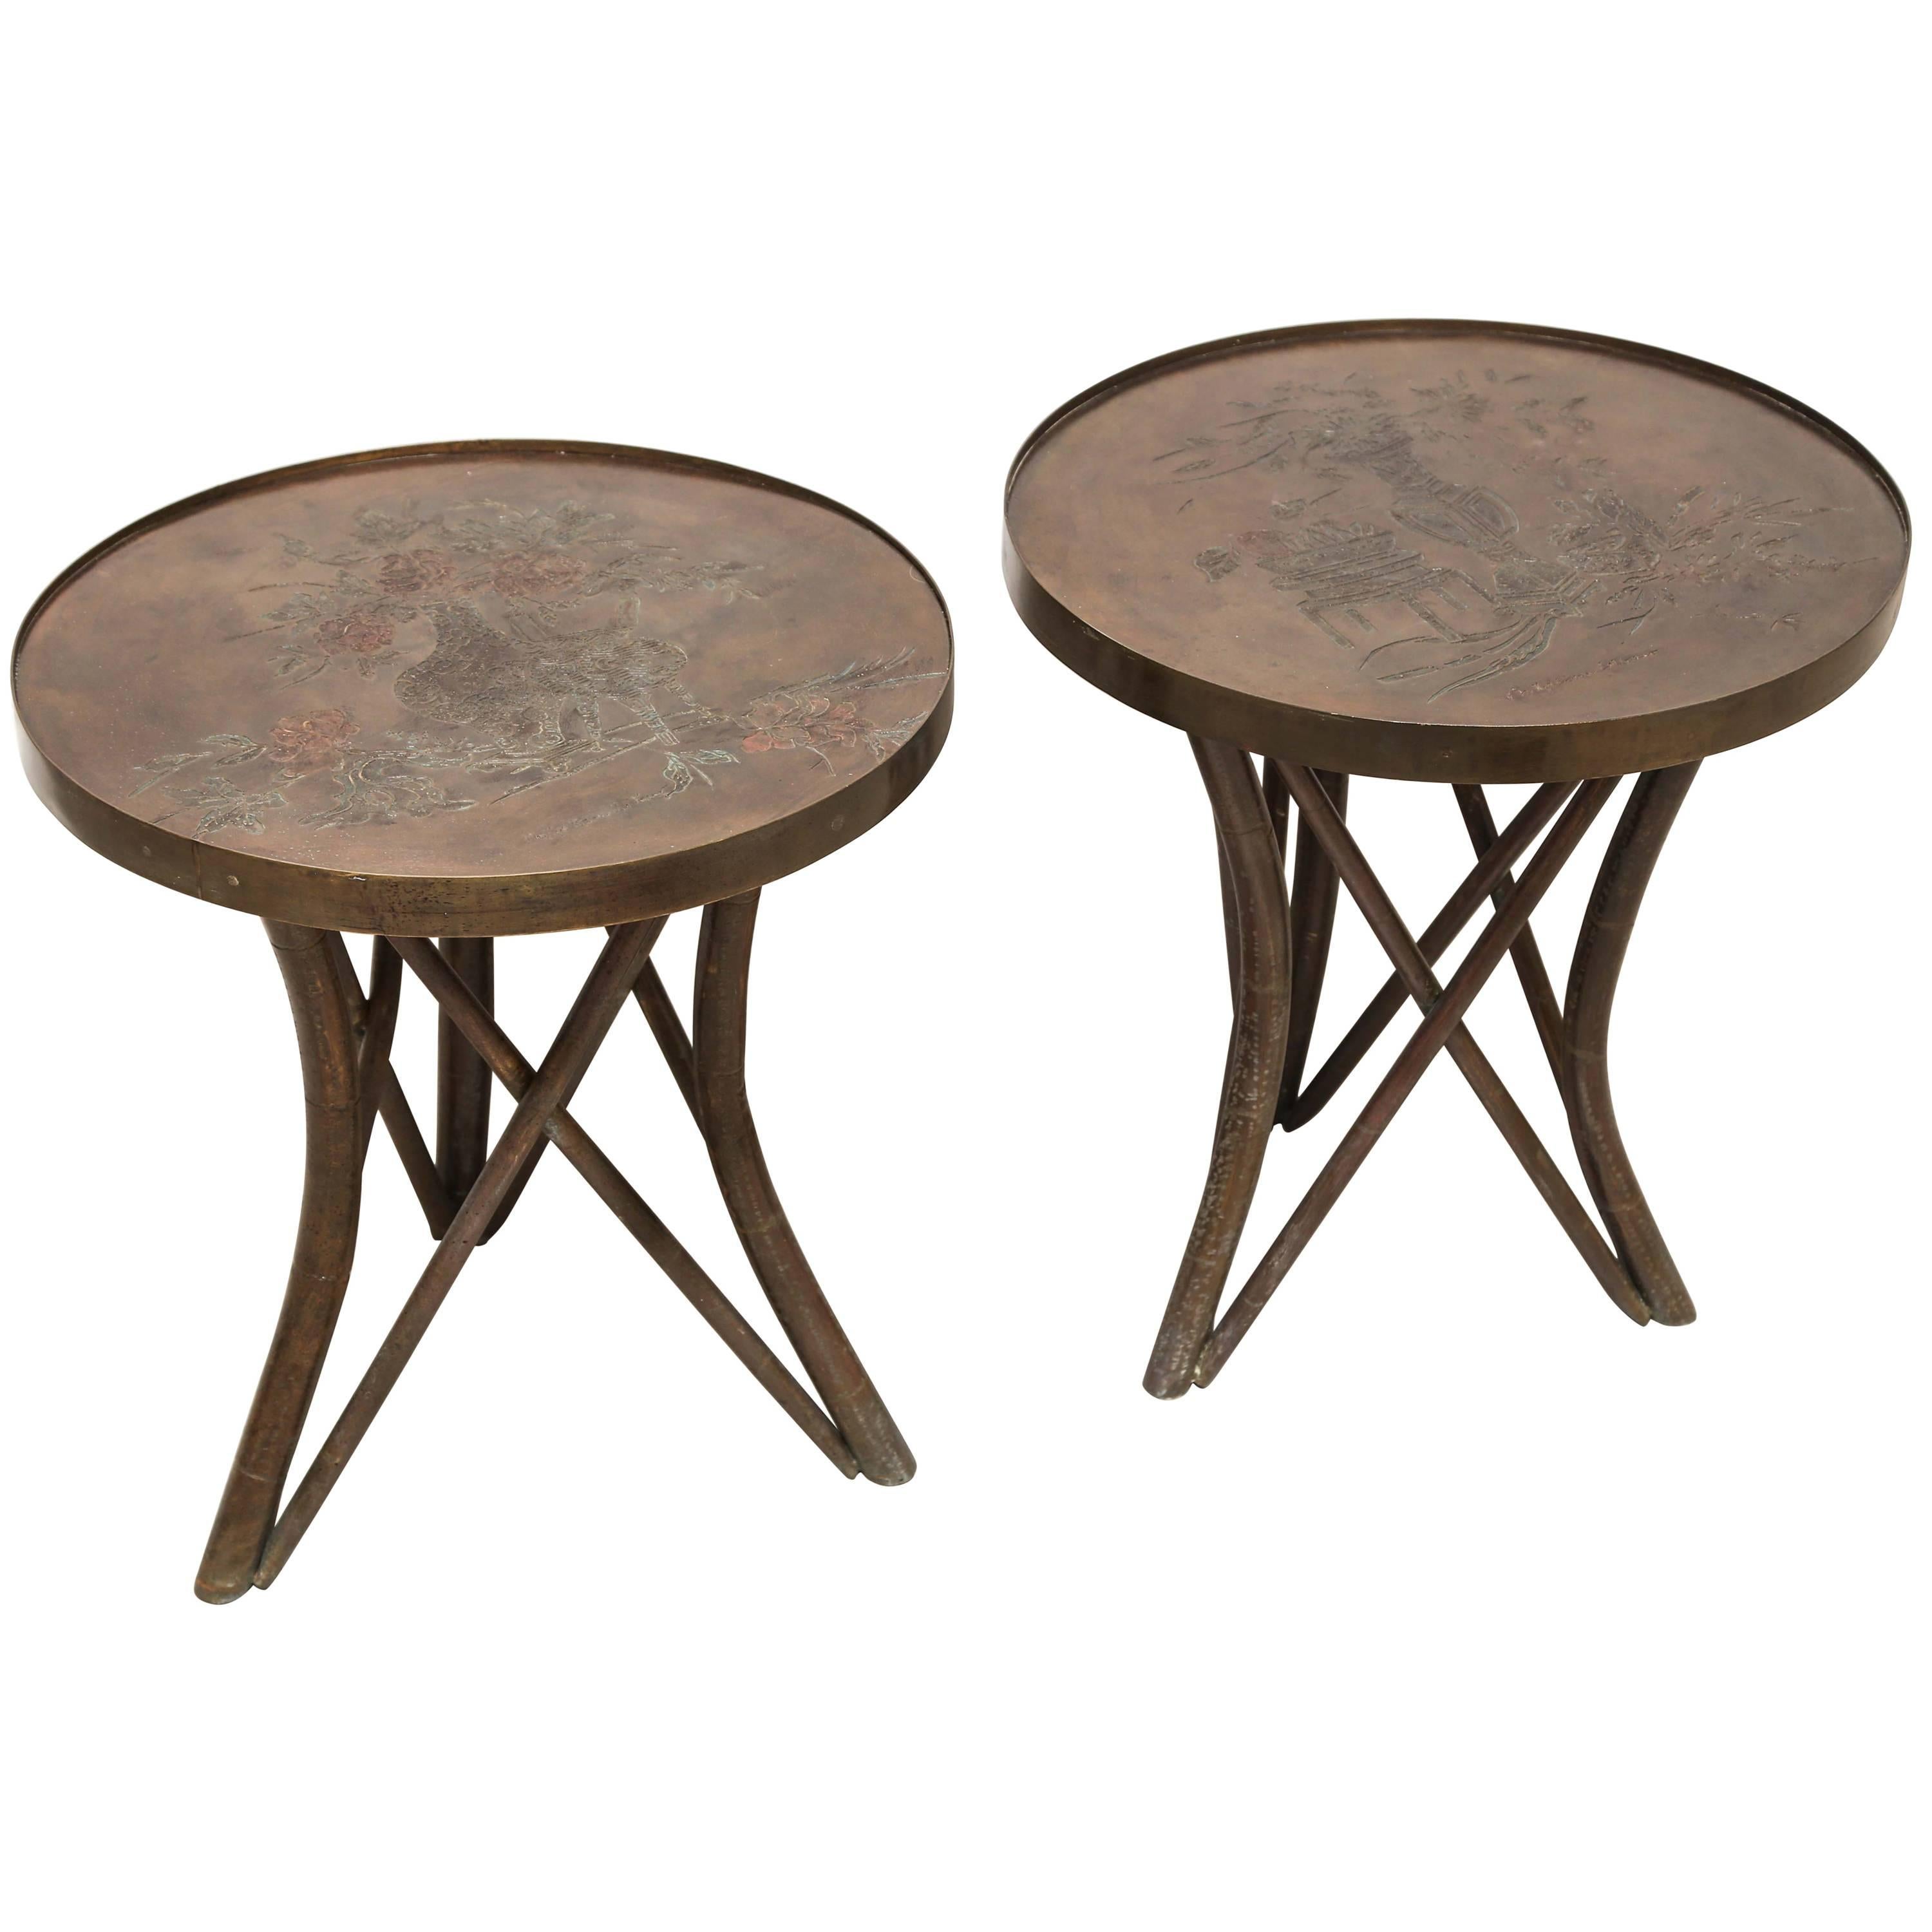 Pair of Circular Laverne Side Tables